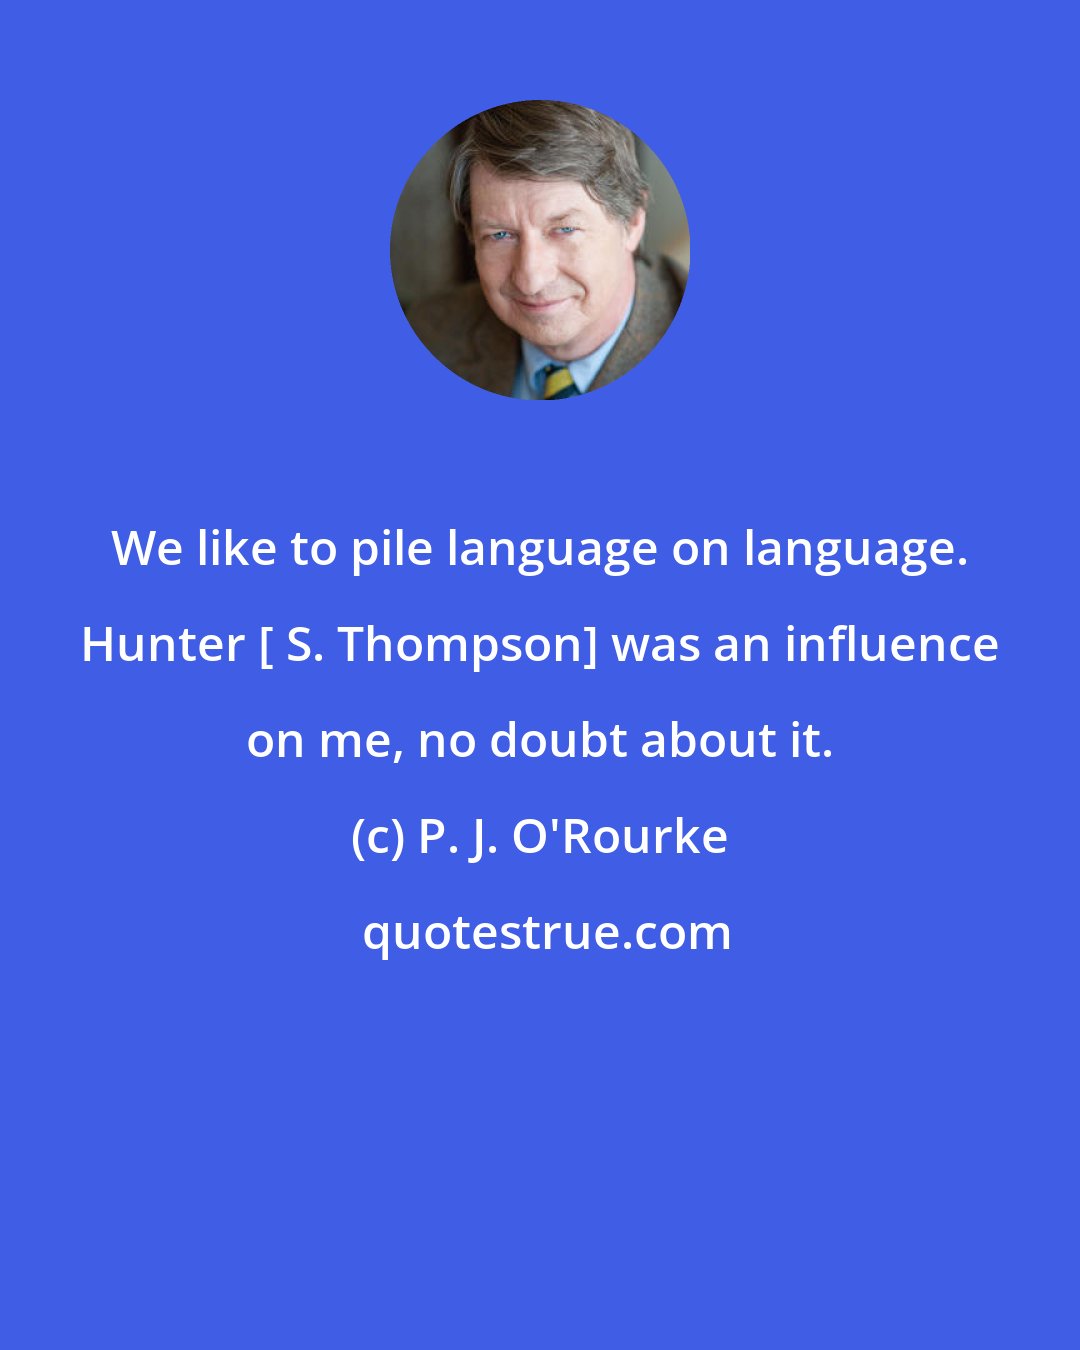 P. J. O'Rourke: We like to pile language on language. Hunter [ S. Thompson] was an influence on me, no doubt about it.